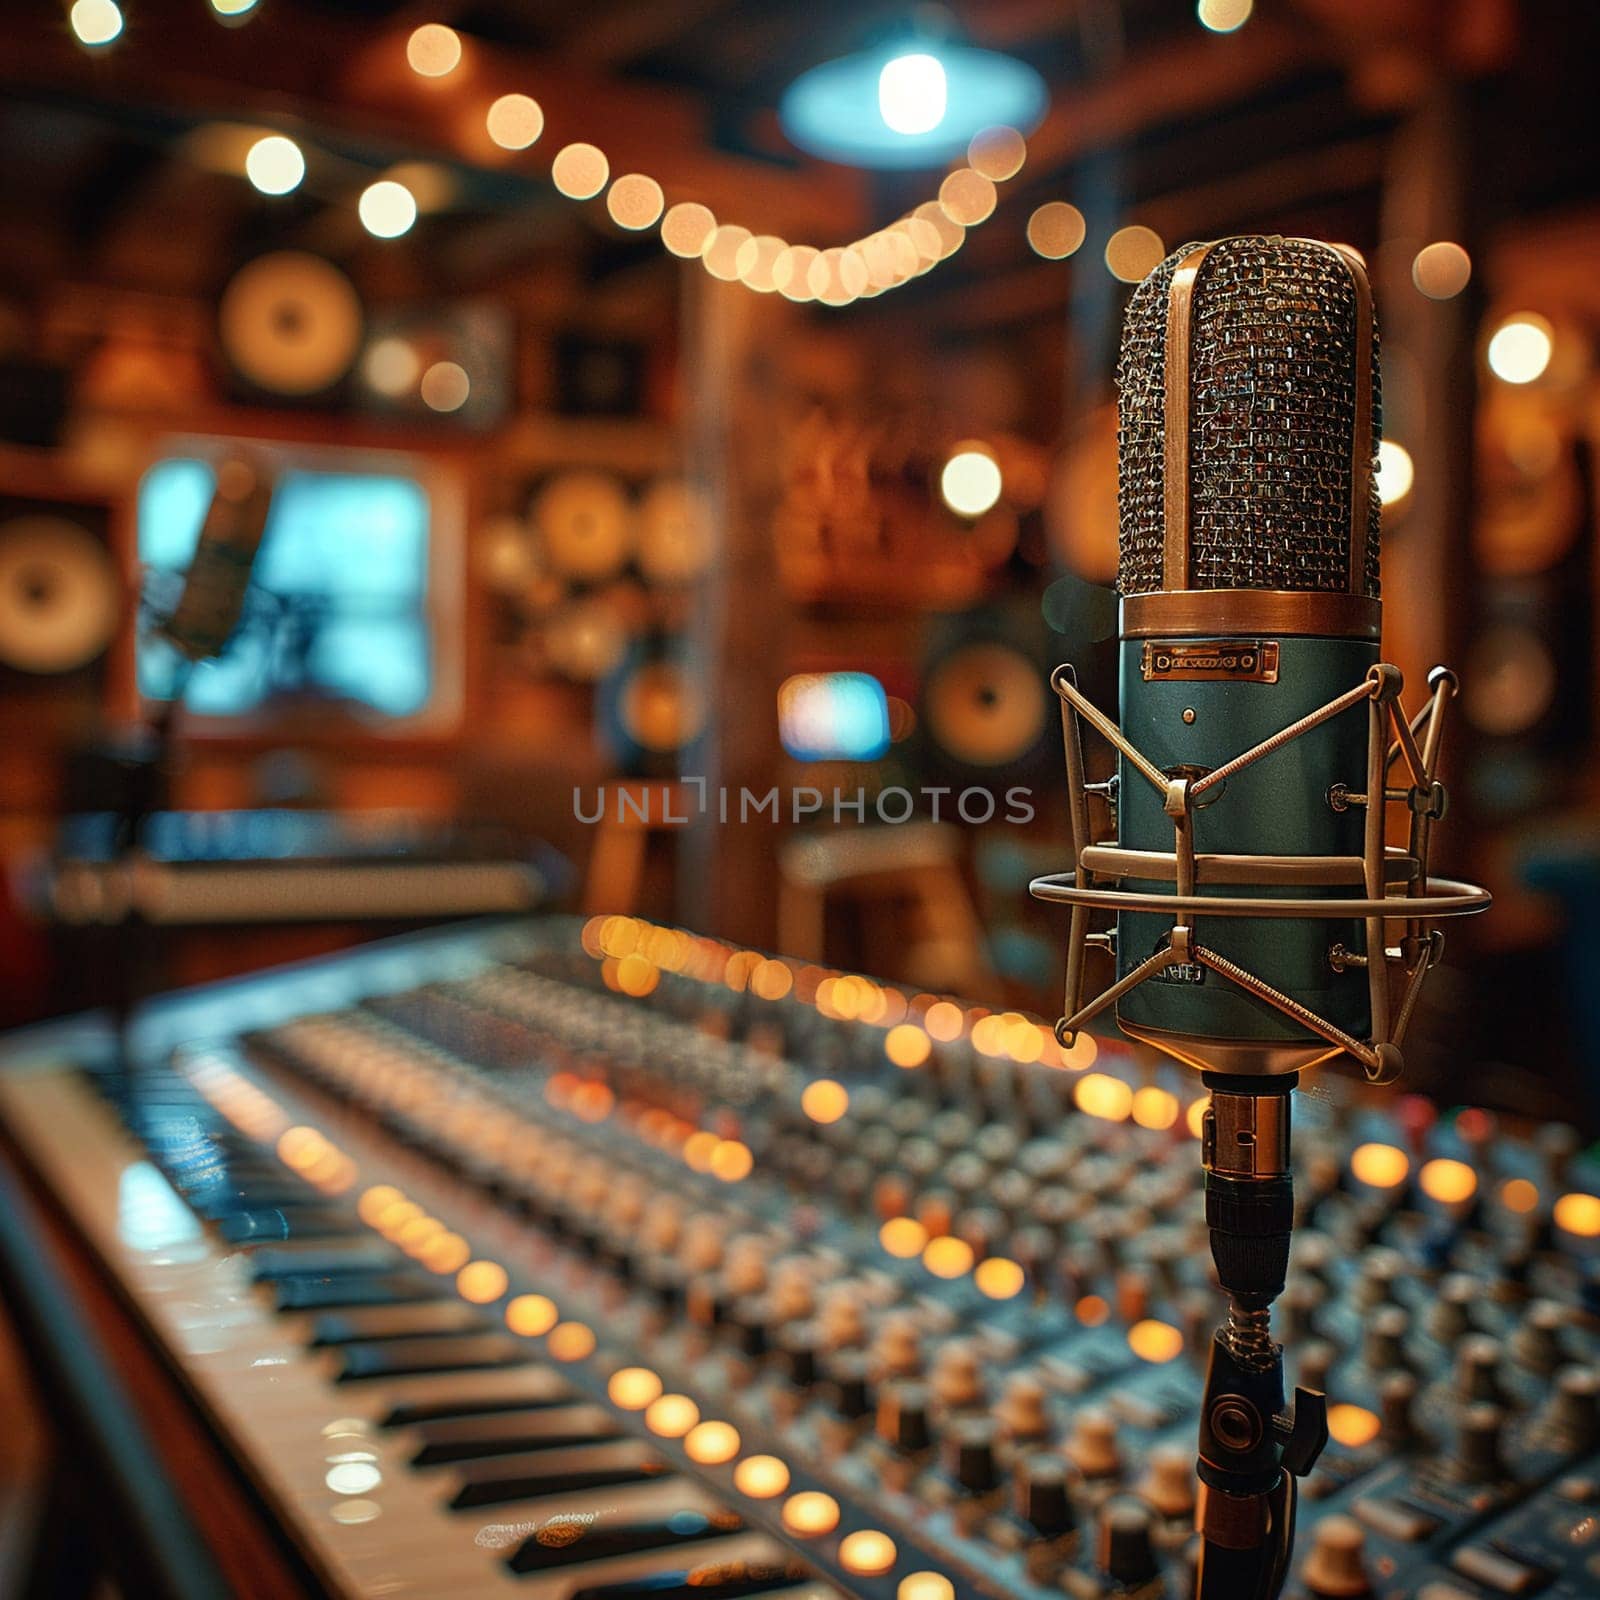 Home Recording Studio Hits High Notes in Business of Independent Music by Benzoix